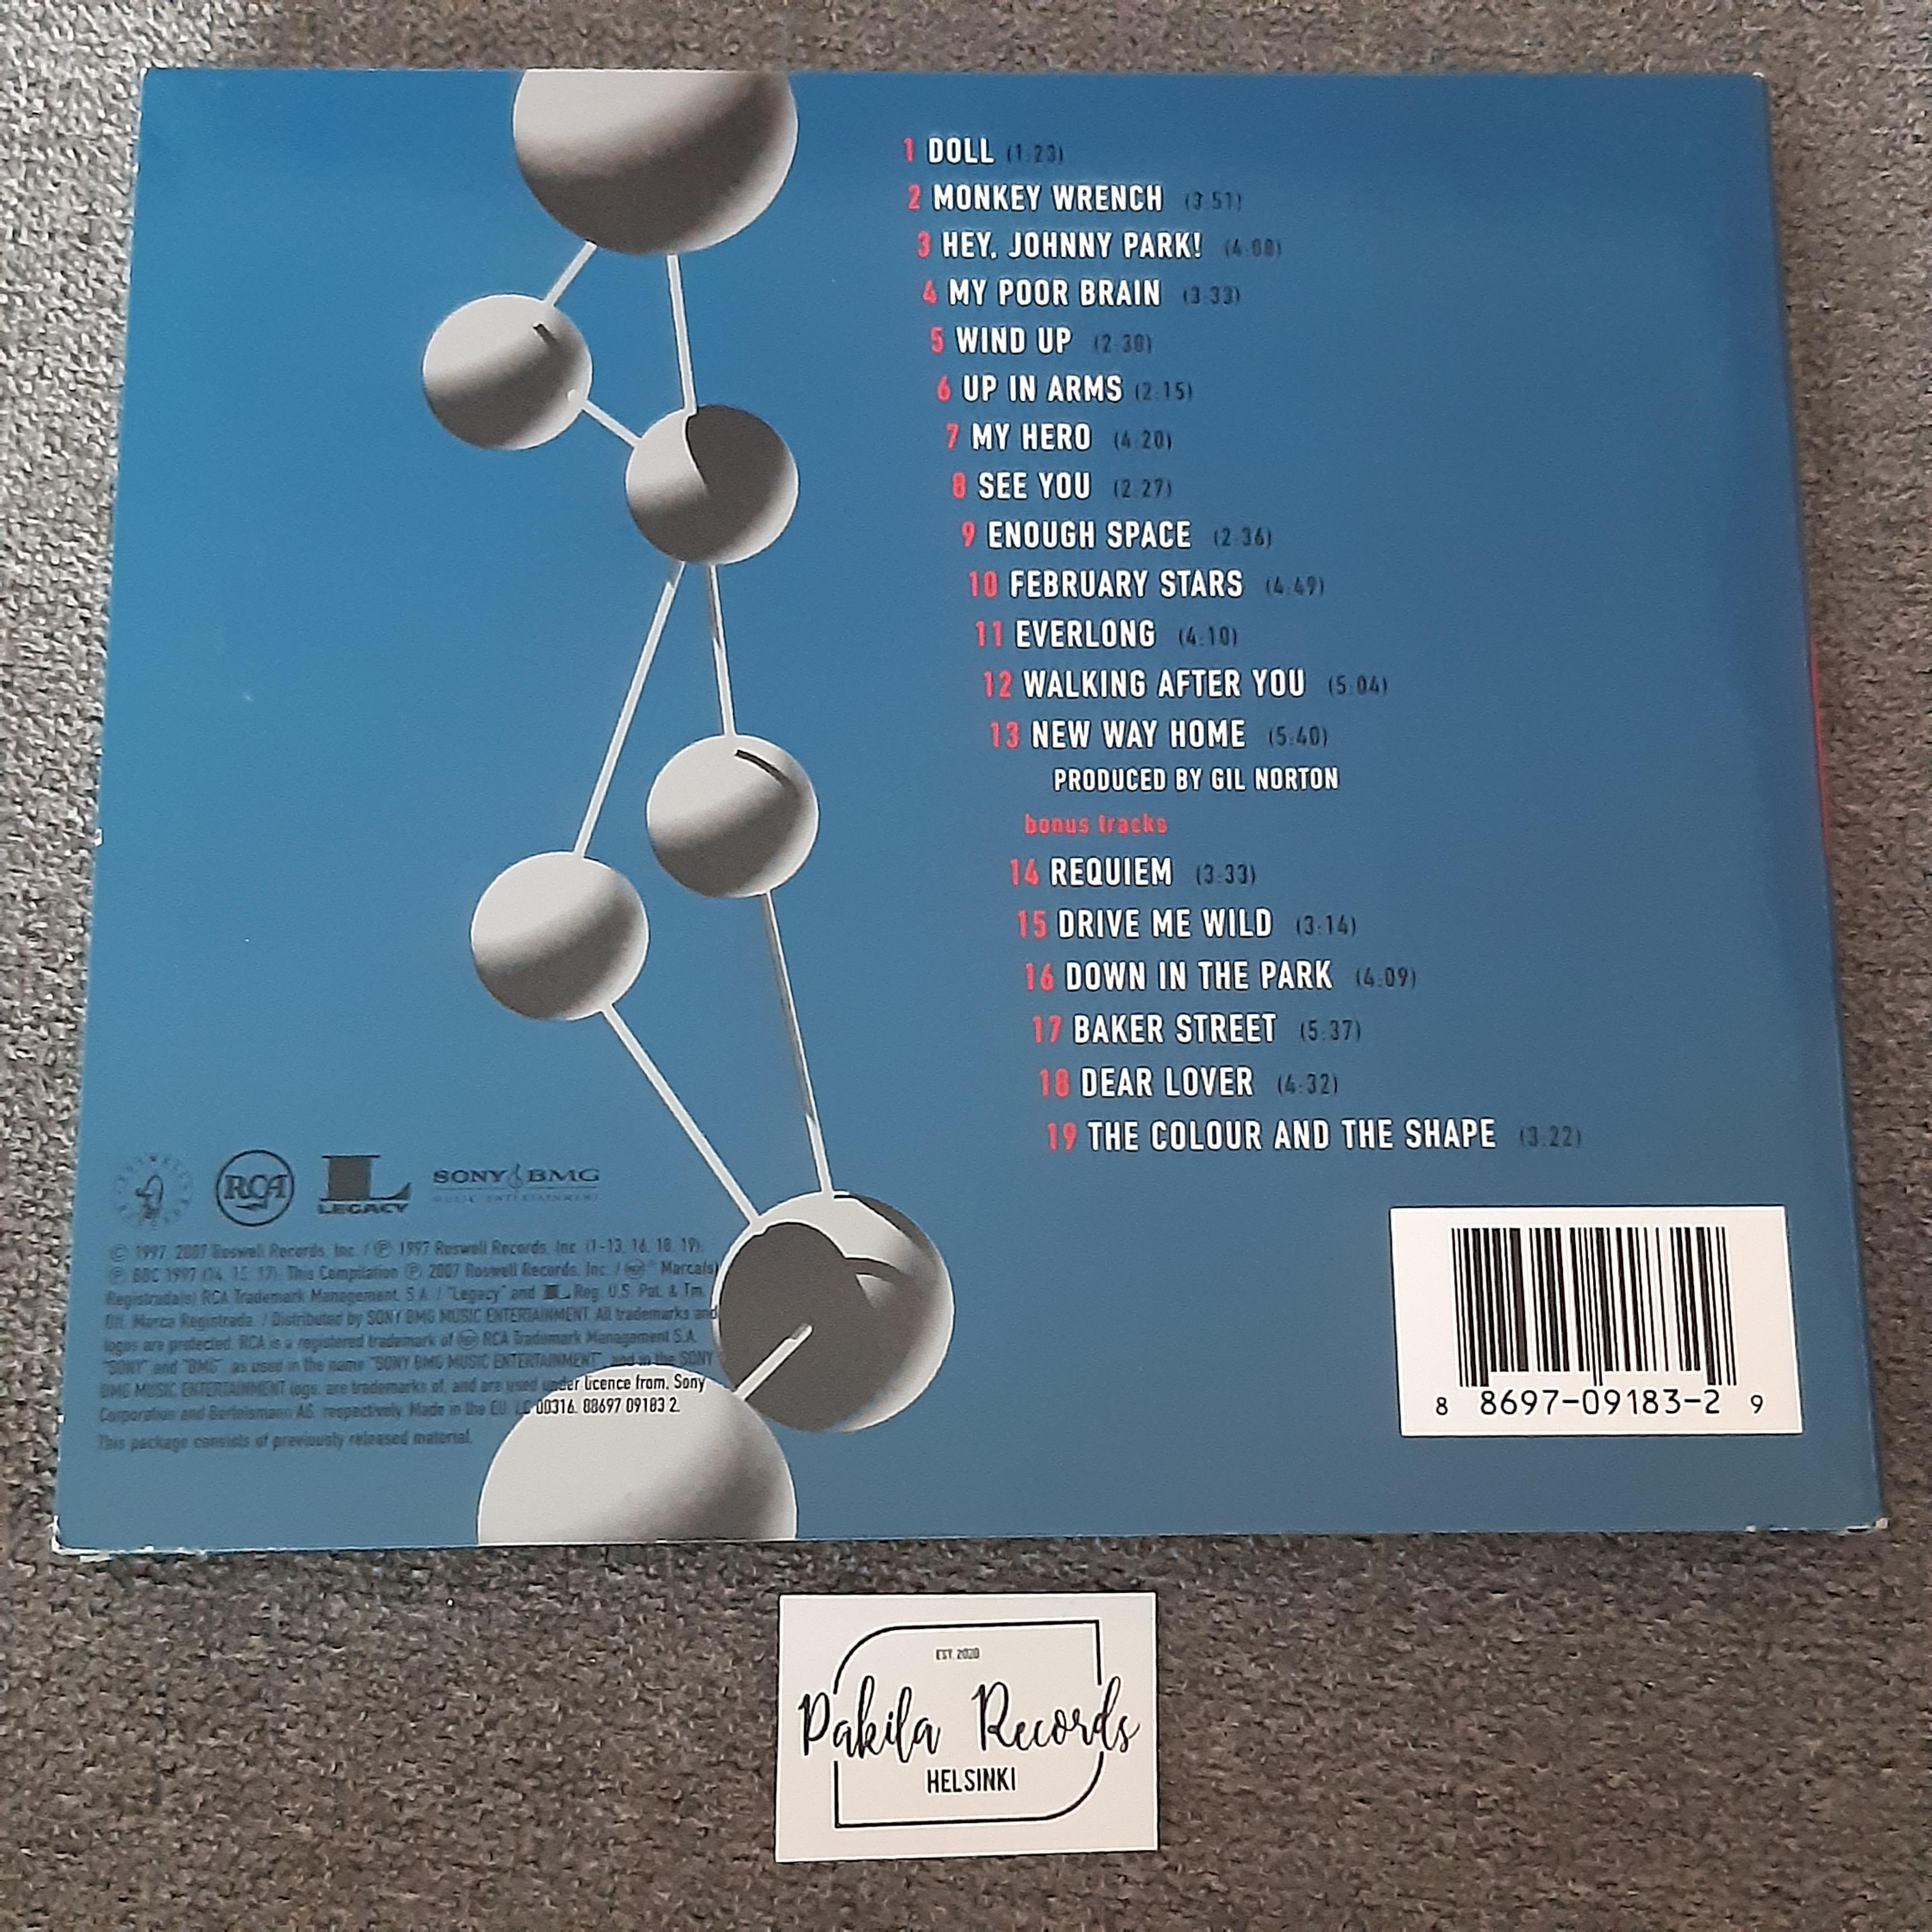 Foo Fighters - The Colour And The Shape - CD (käytetty)